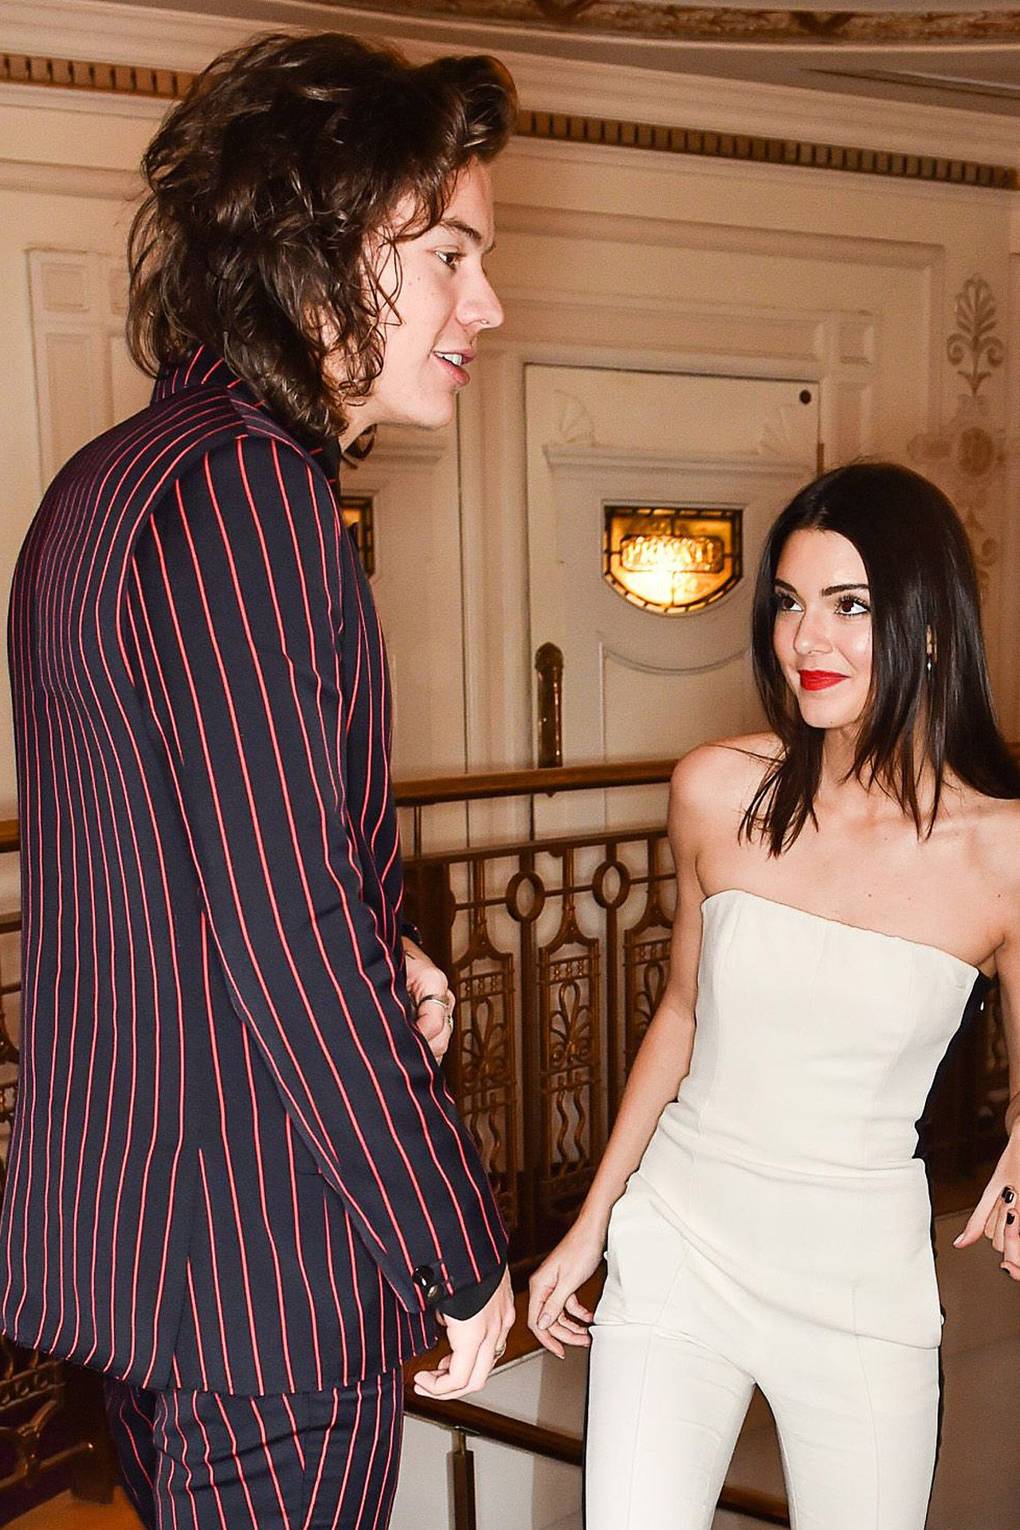 Harry Styles And Kendall Jenners Relationship History Explained